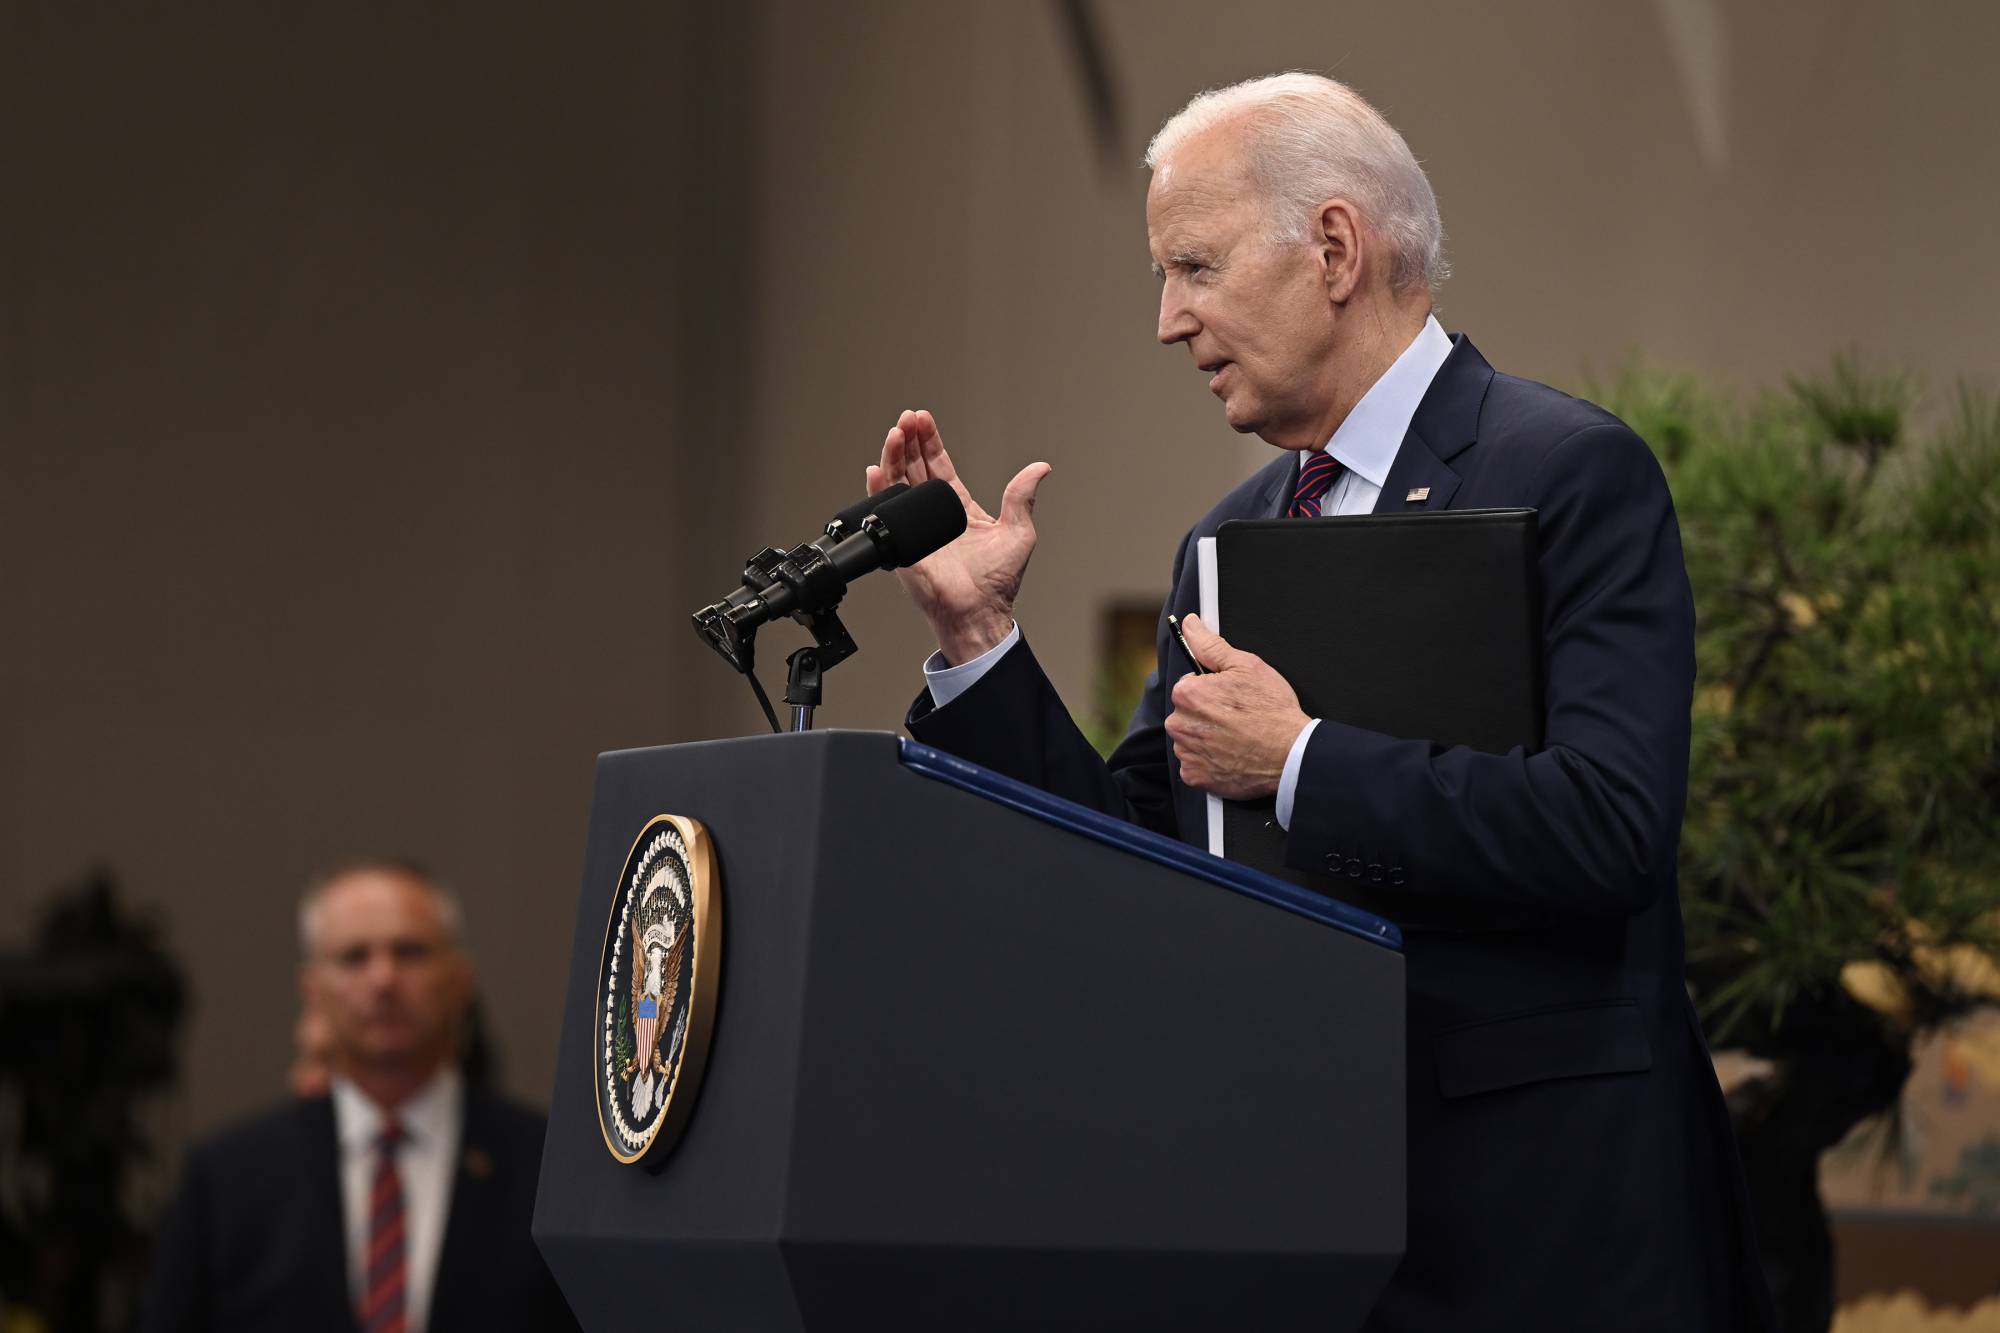 U.S. President Joe Biden speaks during a news conference on the last day of the Group of Seven summit in Hiroshima on Sunday. | KENNY HOLSTON / THE NEW YORK TIMES